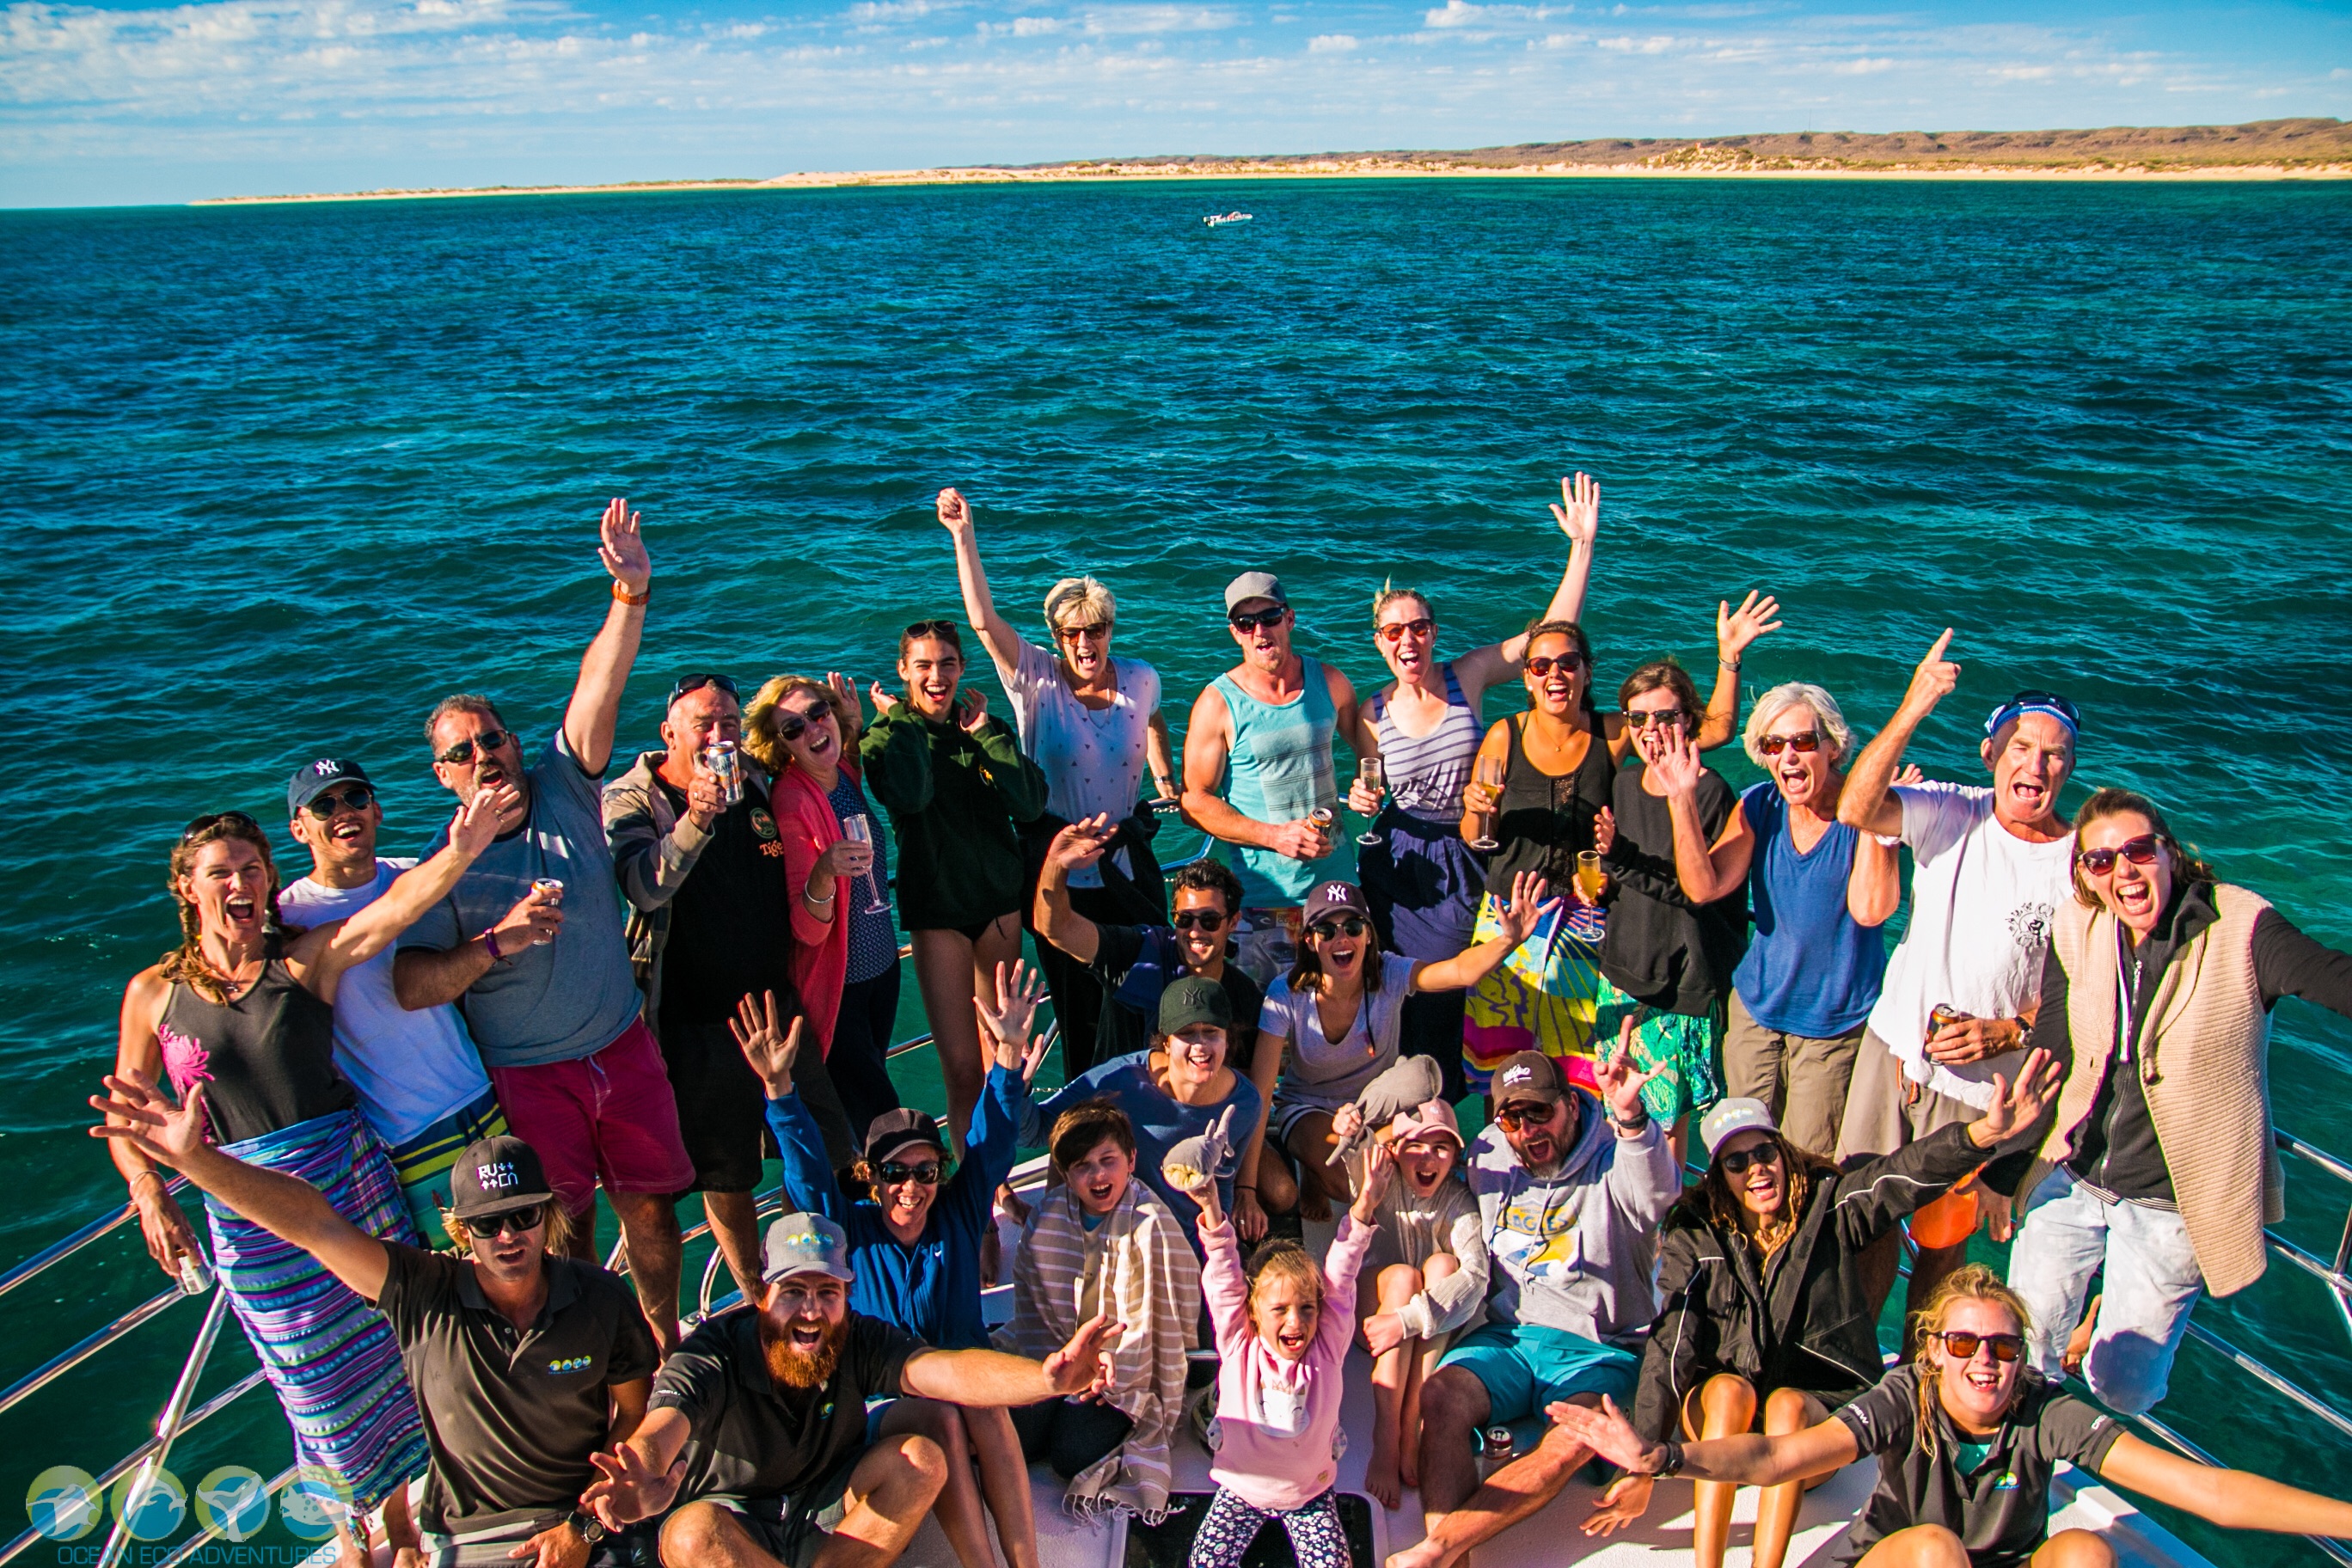 Review Of Ocean Eco Adventures Whale Shark Tour, Exmouth Western Australia.